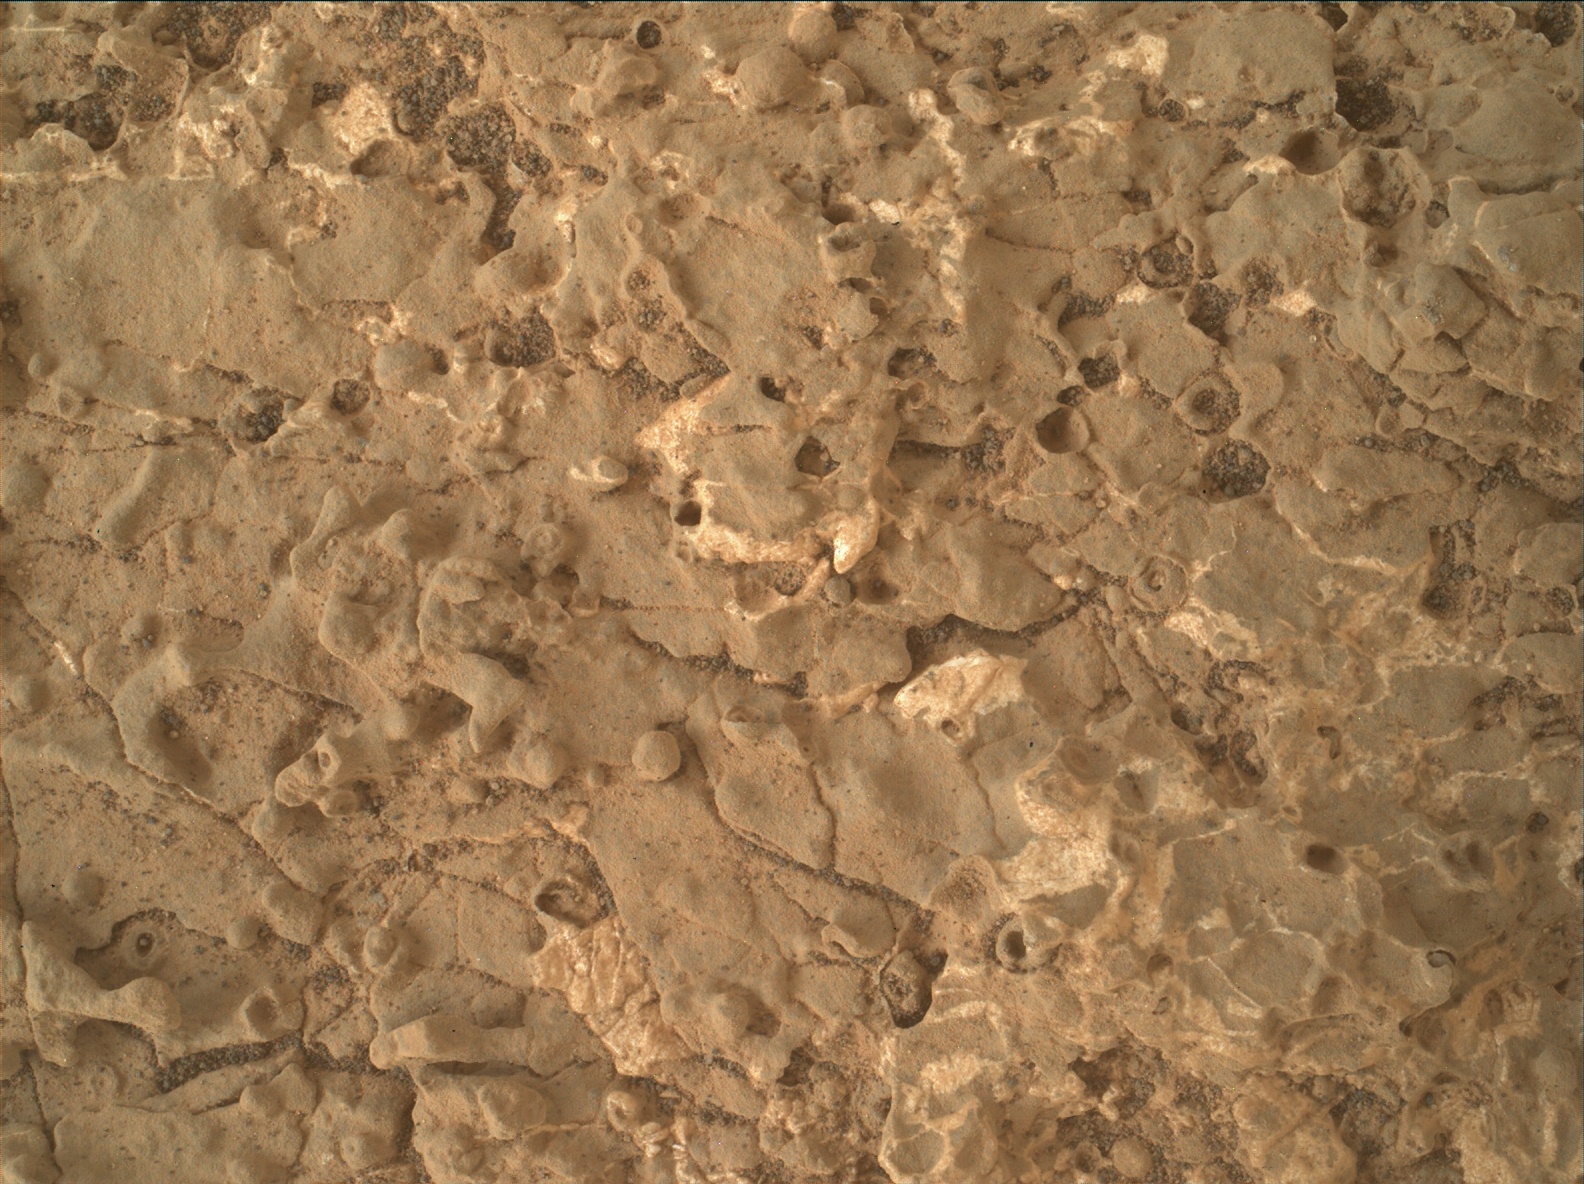 Nasa's Mars rover Curiosity acquired this image using its Mars Hand Lens Imager (MAHLI) on Sol 2661